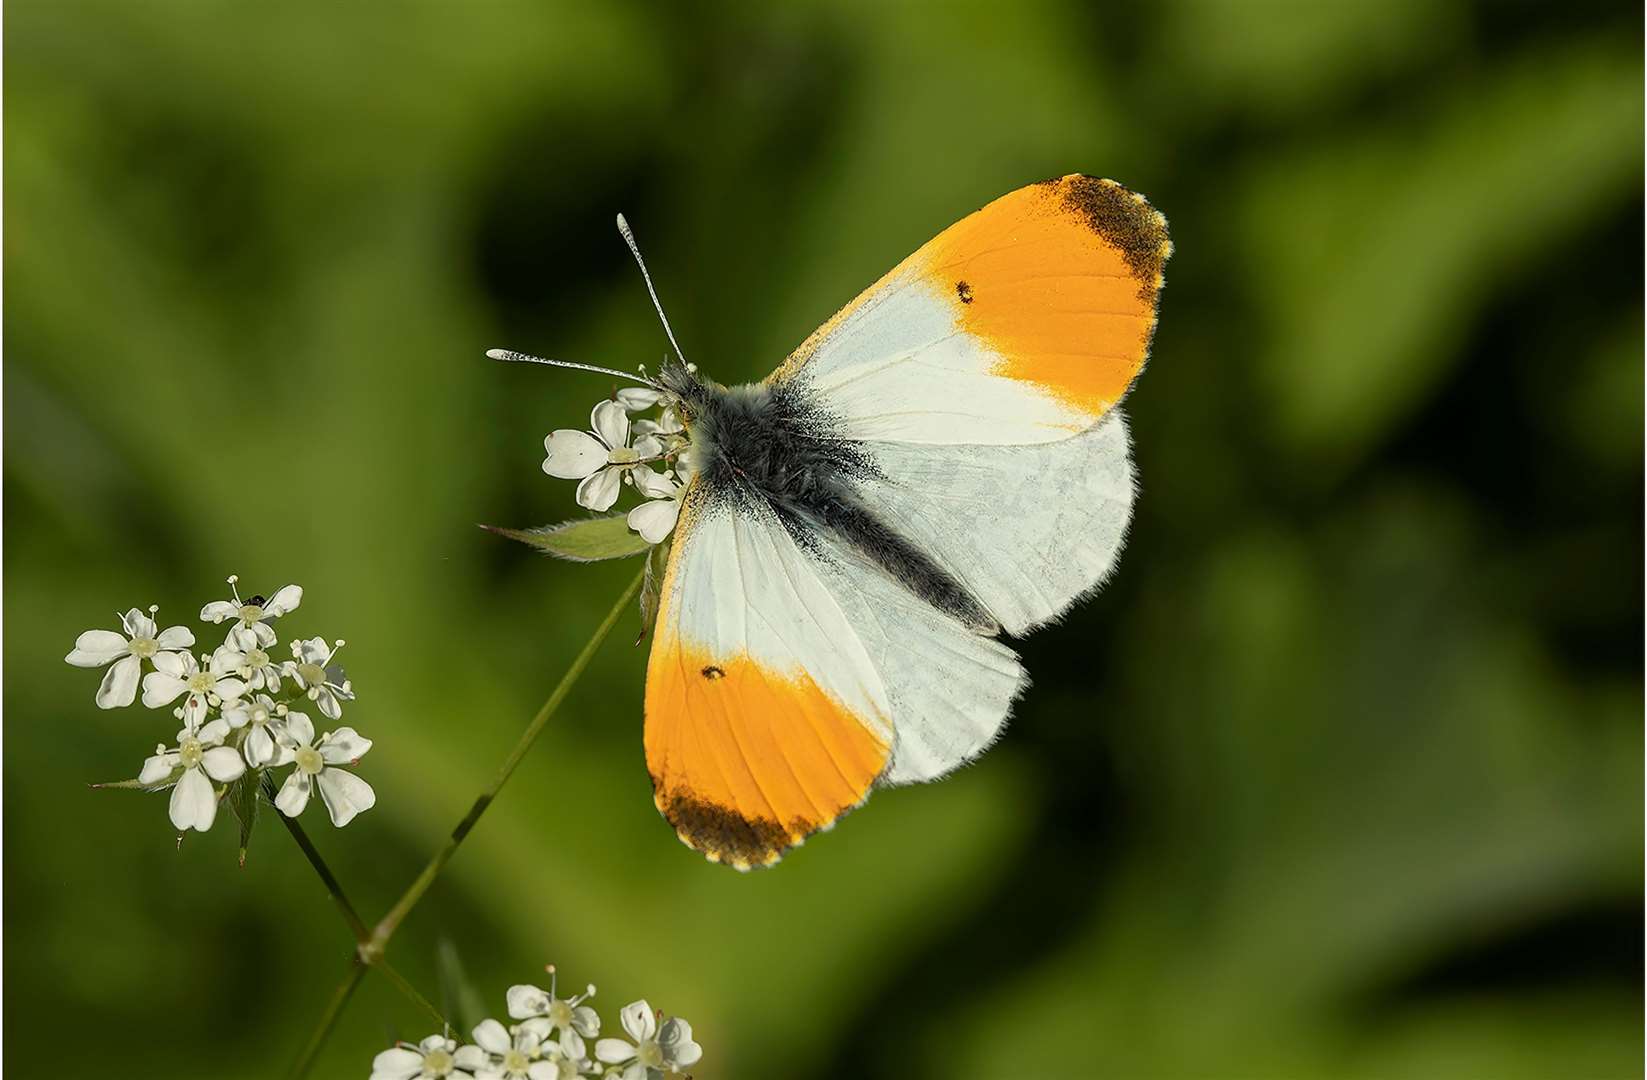 Butterfly numbers are thought to be down this year because of last year’s heatwave. Image: iStock.